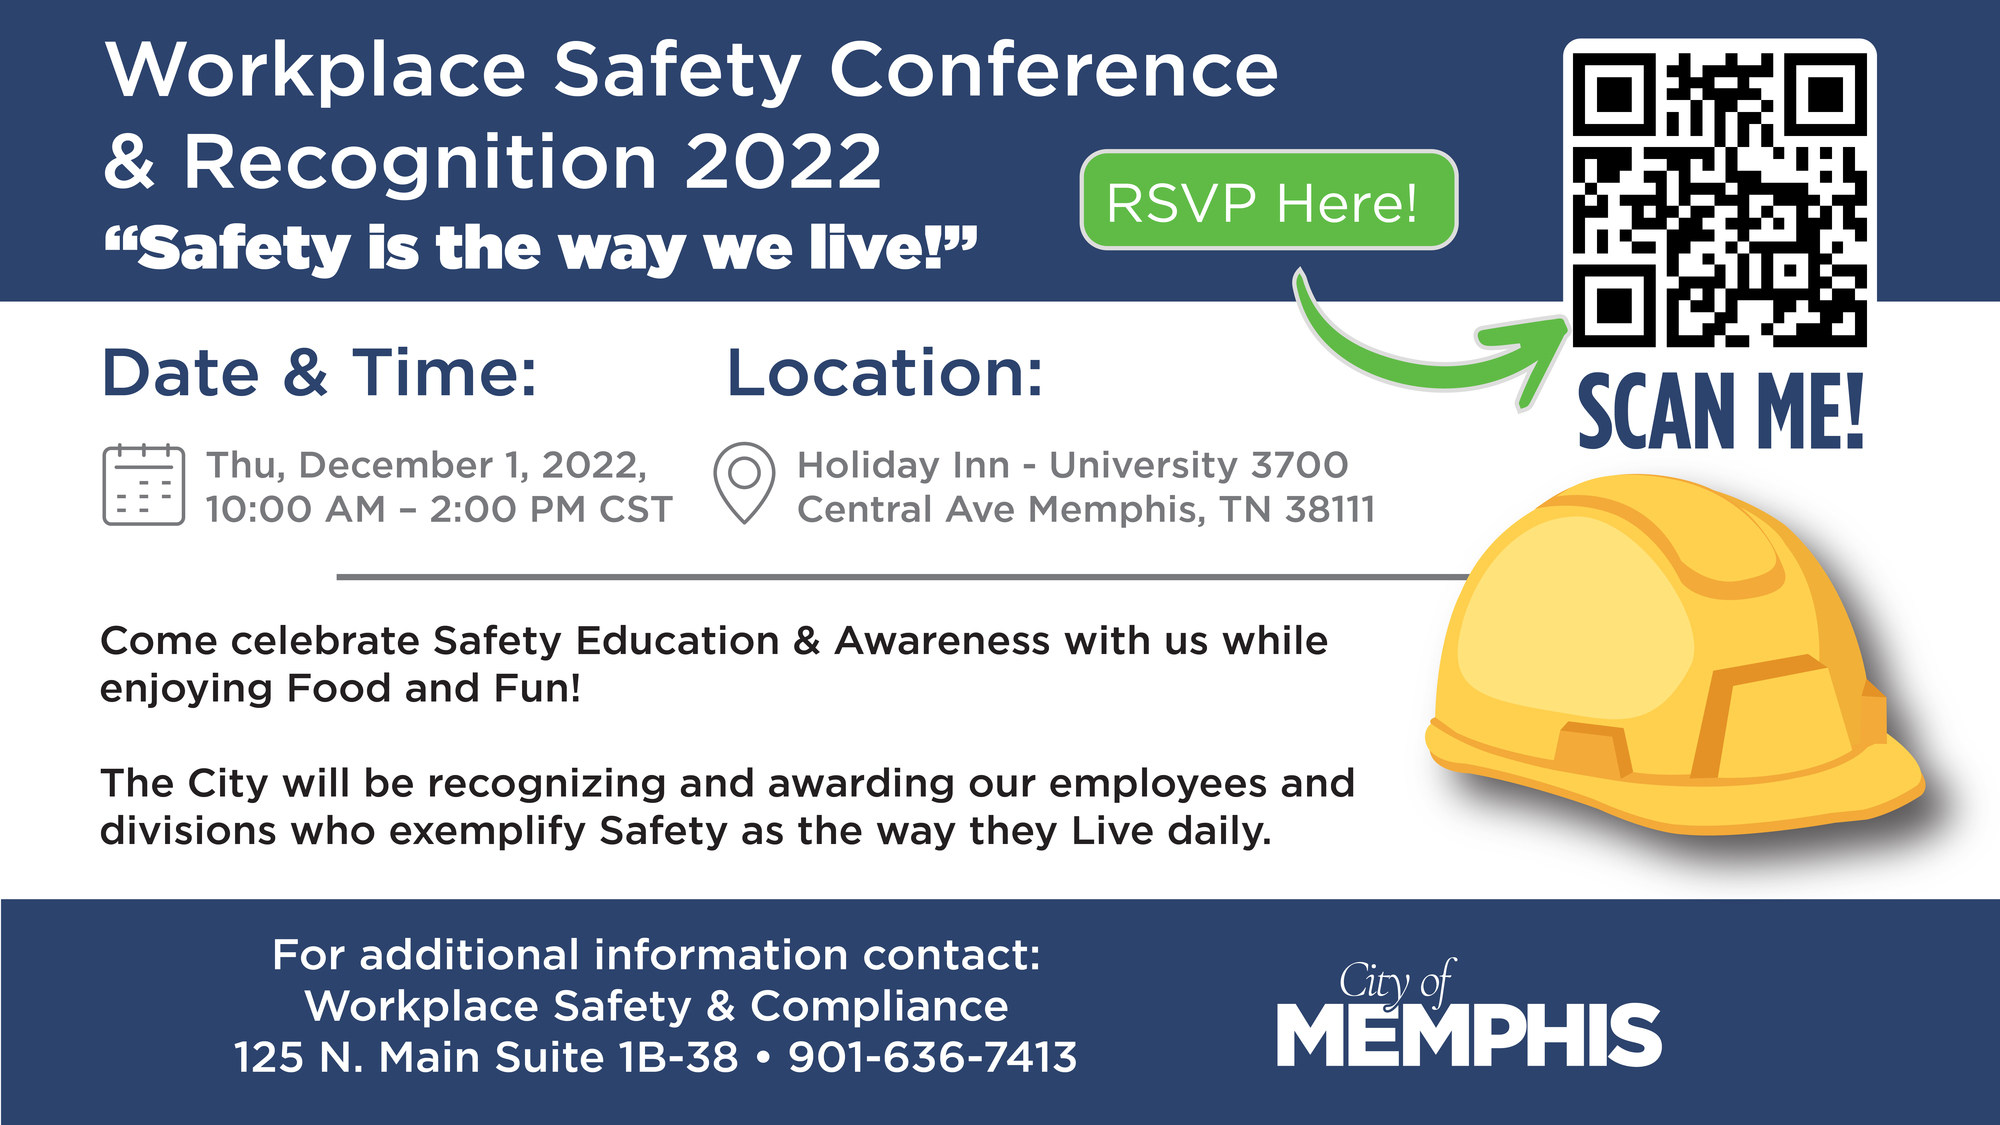 2 More Days Until The Workplace Safety Conference & Recognition 2022